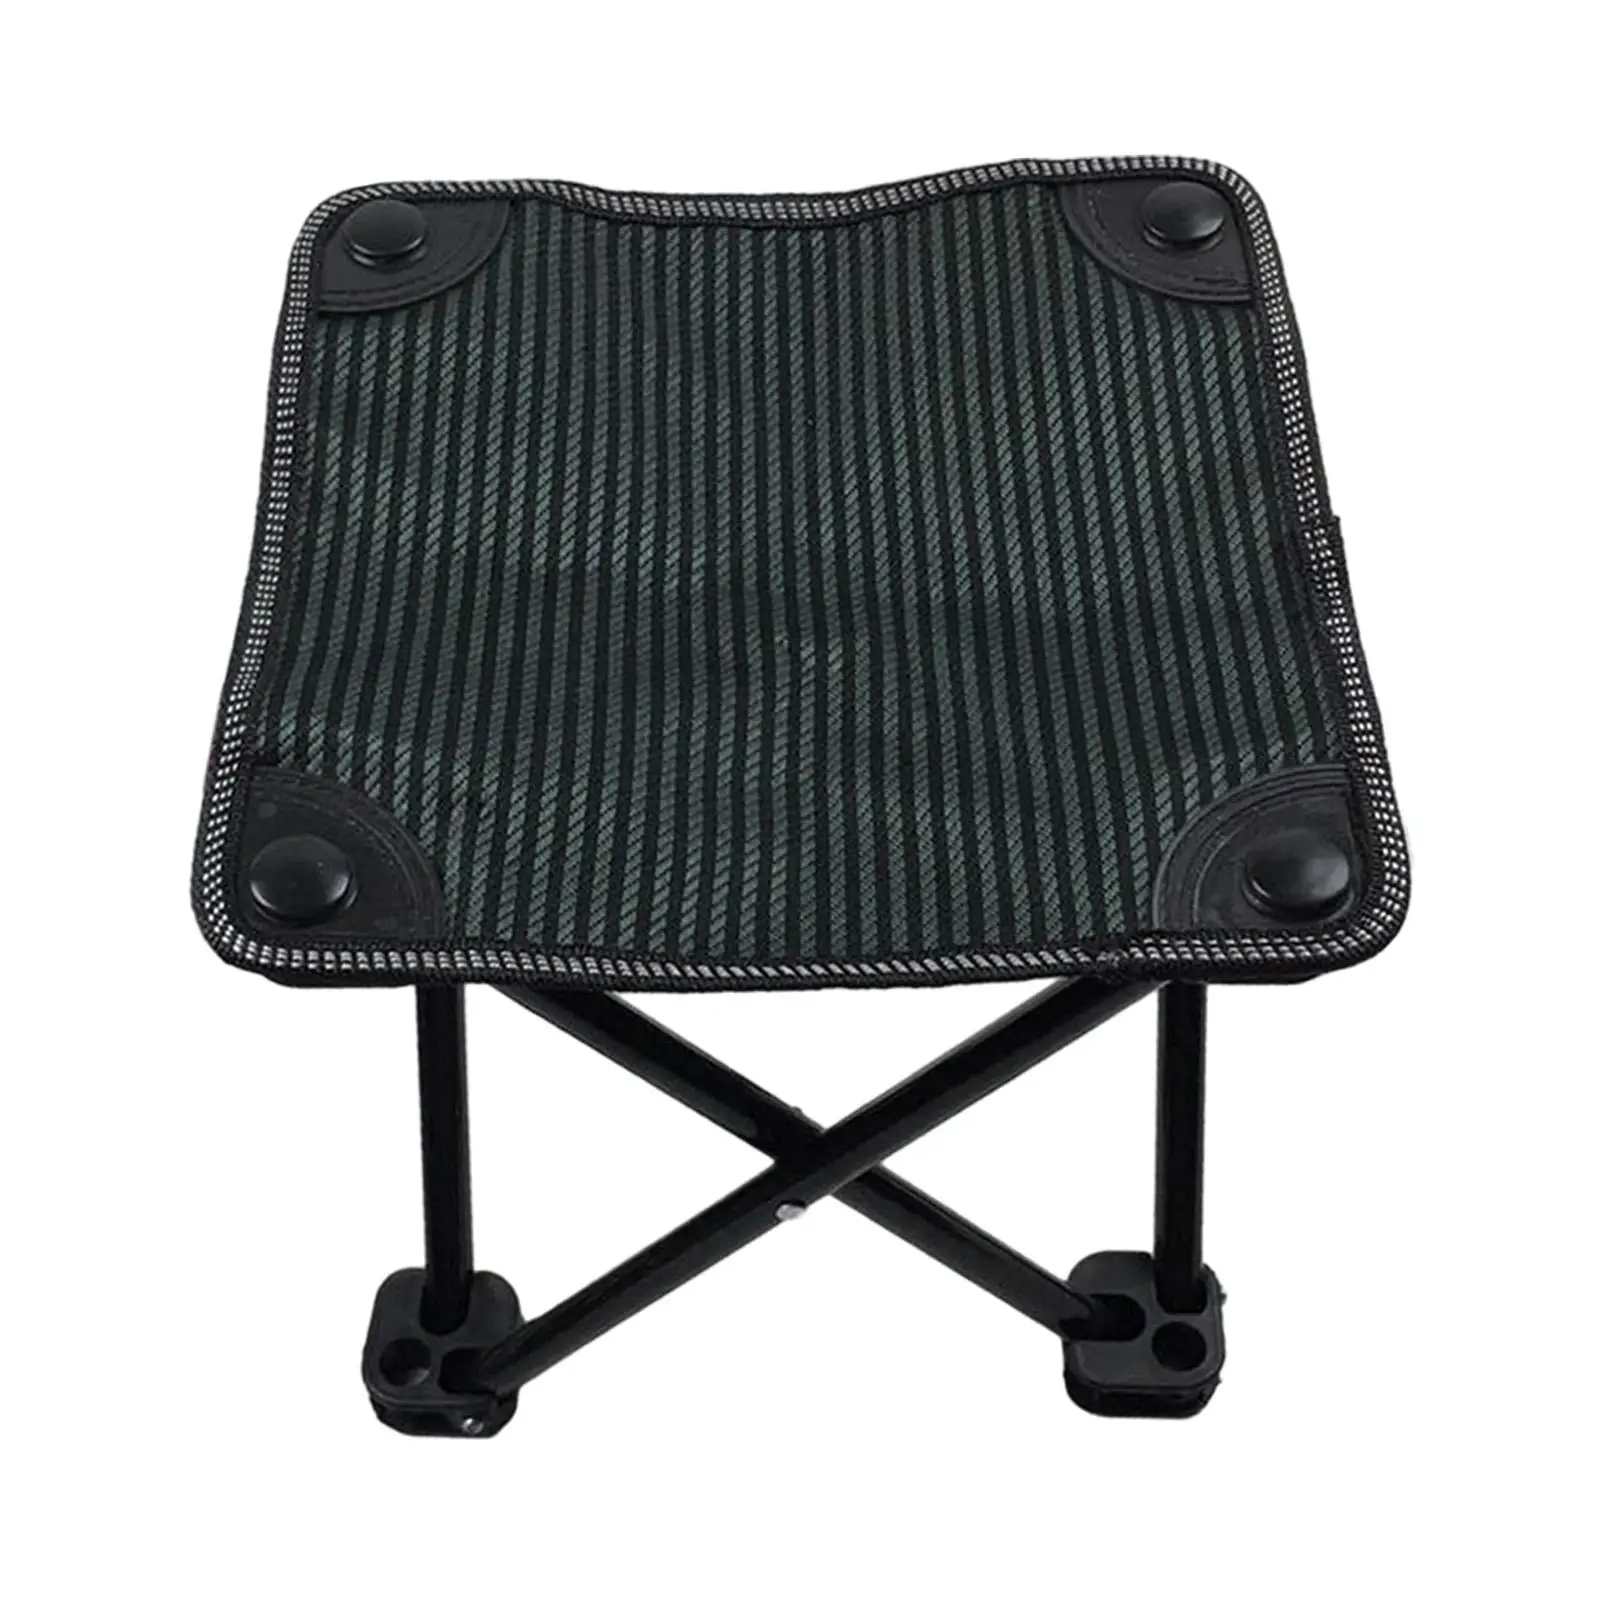 Folding Camping Stool Seat under Desk Footstool recliner Foot Rest Foldable Footstool for Garden Barbecue Picnic Outdoor Travel